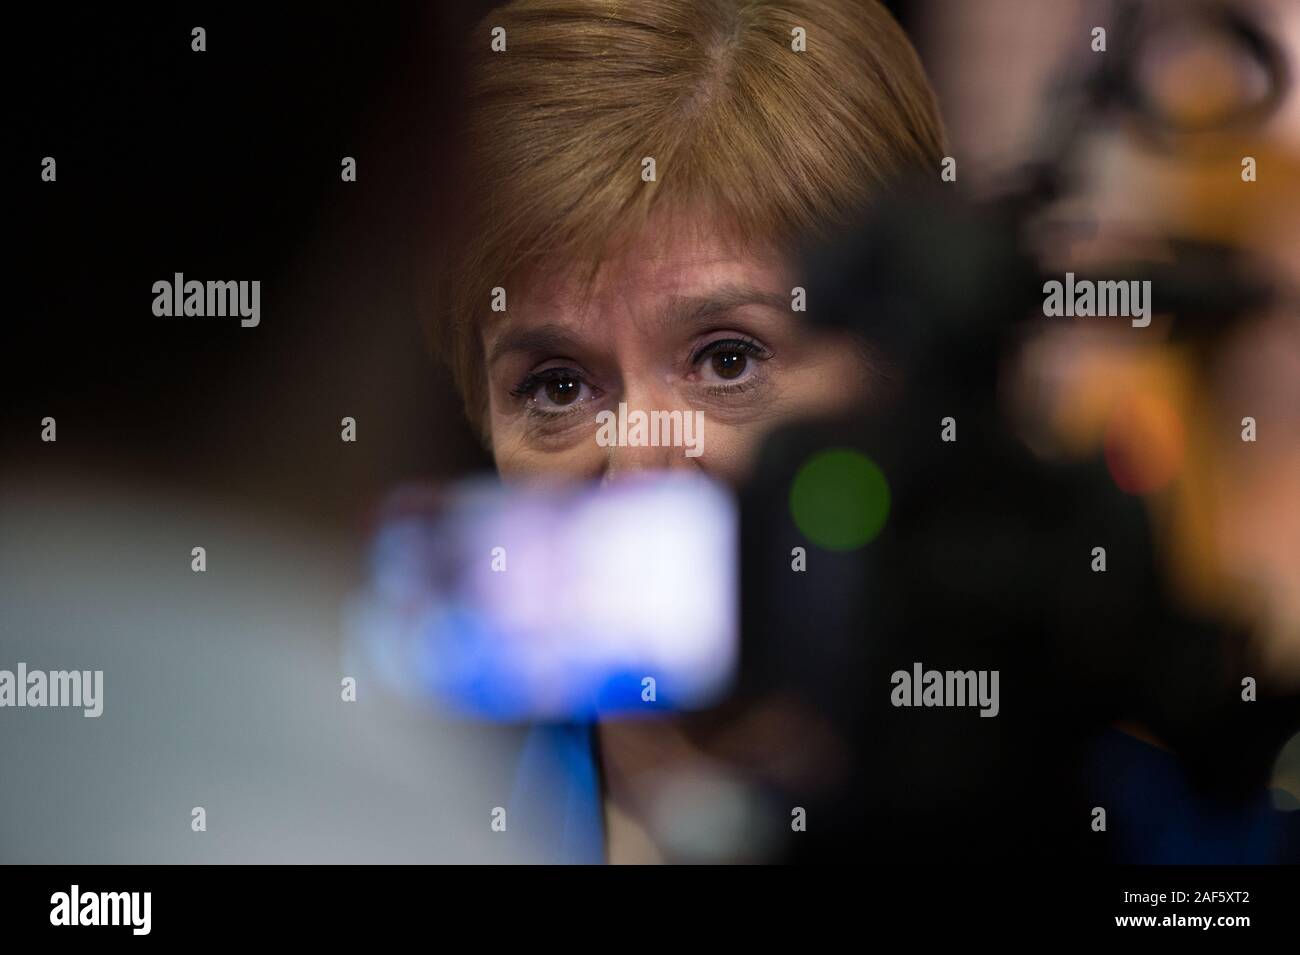 Glasgow, UK. 13th Dec, 2019. Pictured: (in blue) Nicola Sturgeon MSP - First Minister of Scotland and Leader of the Scottish National Party (SNP). Scenes from the vote count at the Scottish Exhibition and Conference Centre (SECC). The poles have now closed at 10pm and the vote count is now underway for the UK Parliamentary General Election 2019. This is the first time in almost 100 years that a general election has taken place in December. Credit: Colin Fisher/Alamy Live News Stock Photo